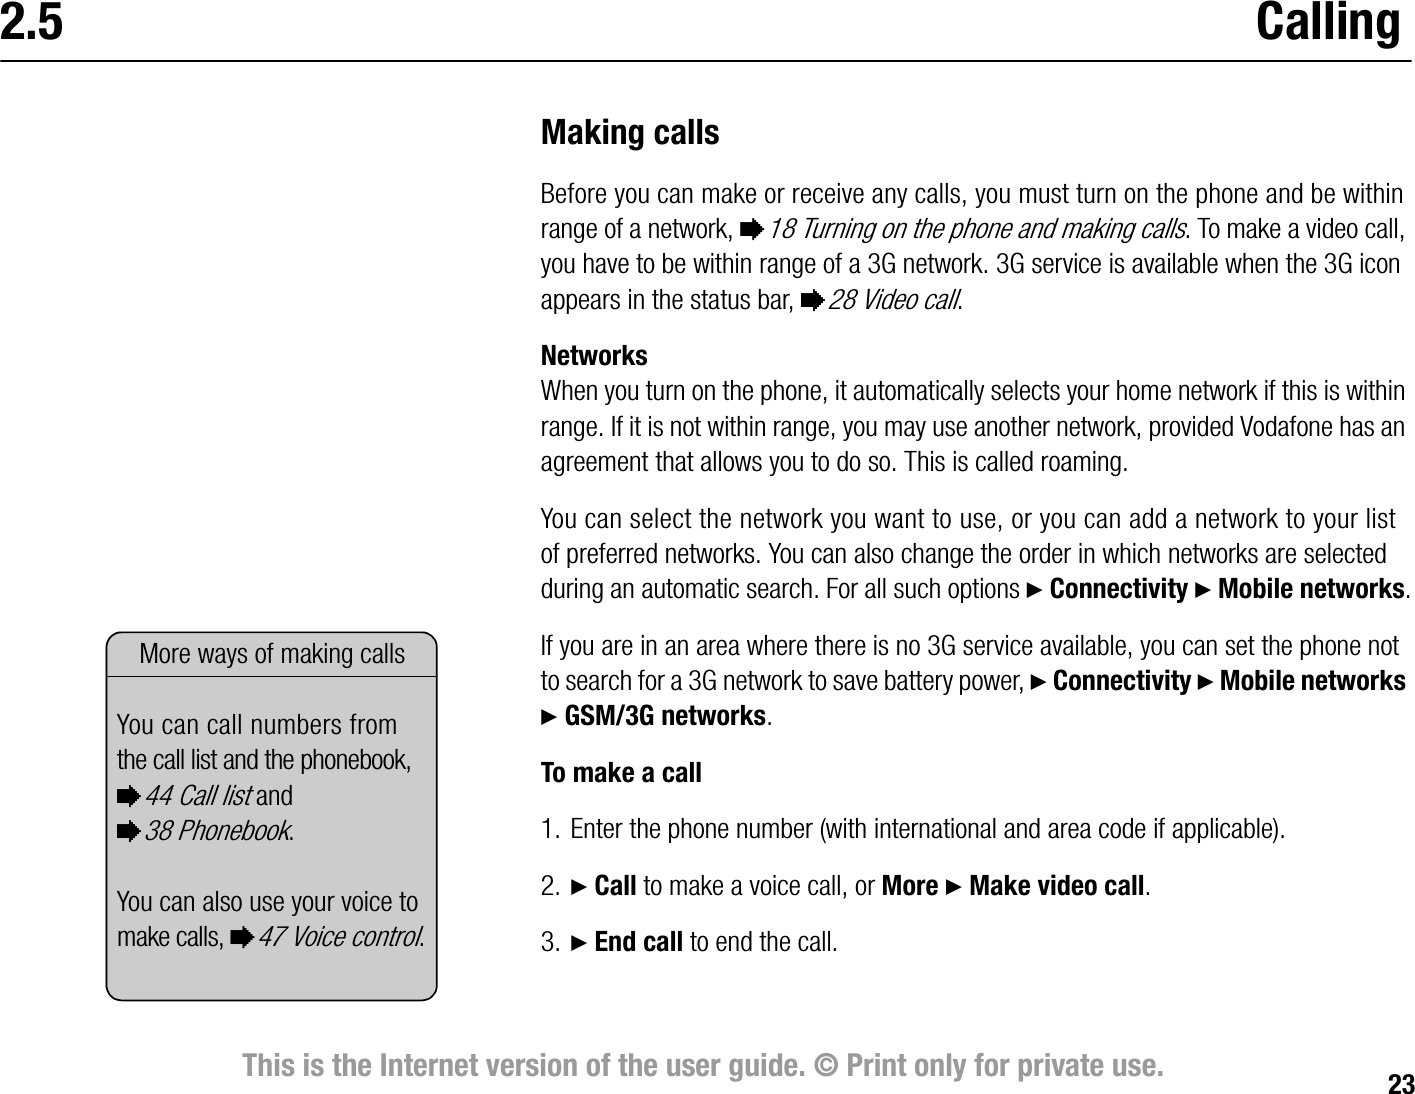 23This is the Internet version of the user guide. © Print only for private use.2.5 CallingMaking callsBefore you can make or receive any calls, you must turn on the phone and be within range of a network, %18 Turning on the phone and making calls. To make a video call, you have to be within range of a 3G network. 3G service is available when the 3G icon appears in the status bar, %28 Video call.NetworksWhen you turn on the phone, it automatically selects your home network if this is within range. If it is not within range, you may use another network, provided Vodafone has an agreement that allows you to do so. This is called roaming.You can select the network you want to use, or you can add a network to your list of preferred networks. You can also change the order in which networks are selected during an automatic search. For all such options } Connectivity } Mobile networks.If you are in an area where there is no 3G service available, you can set the phone not to search for a 3G network to save battery power, } Connectivity } Mobile networks } GSM/3G networks.To make a call1. Enter the phone number (with international and area code if applicable).2. } Call to make a voice call, or More } Make video call.3. } End call to end the call.More ways of making callsYou can call numbers from the call list and the phonebook, %44 Call list and %38 Phonebook. You can also use your voice to make calls, %47 Voice control.